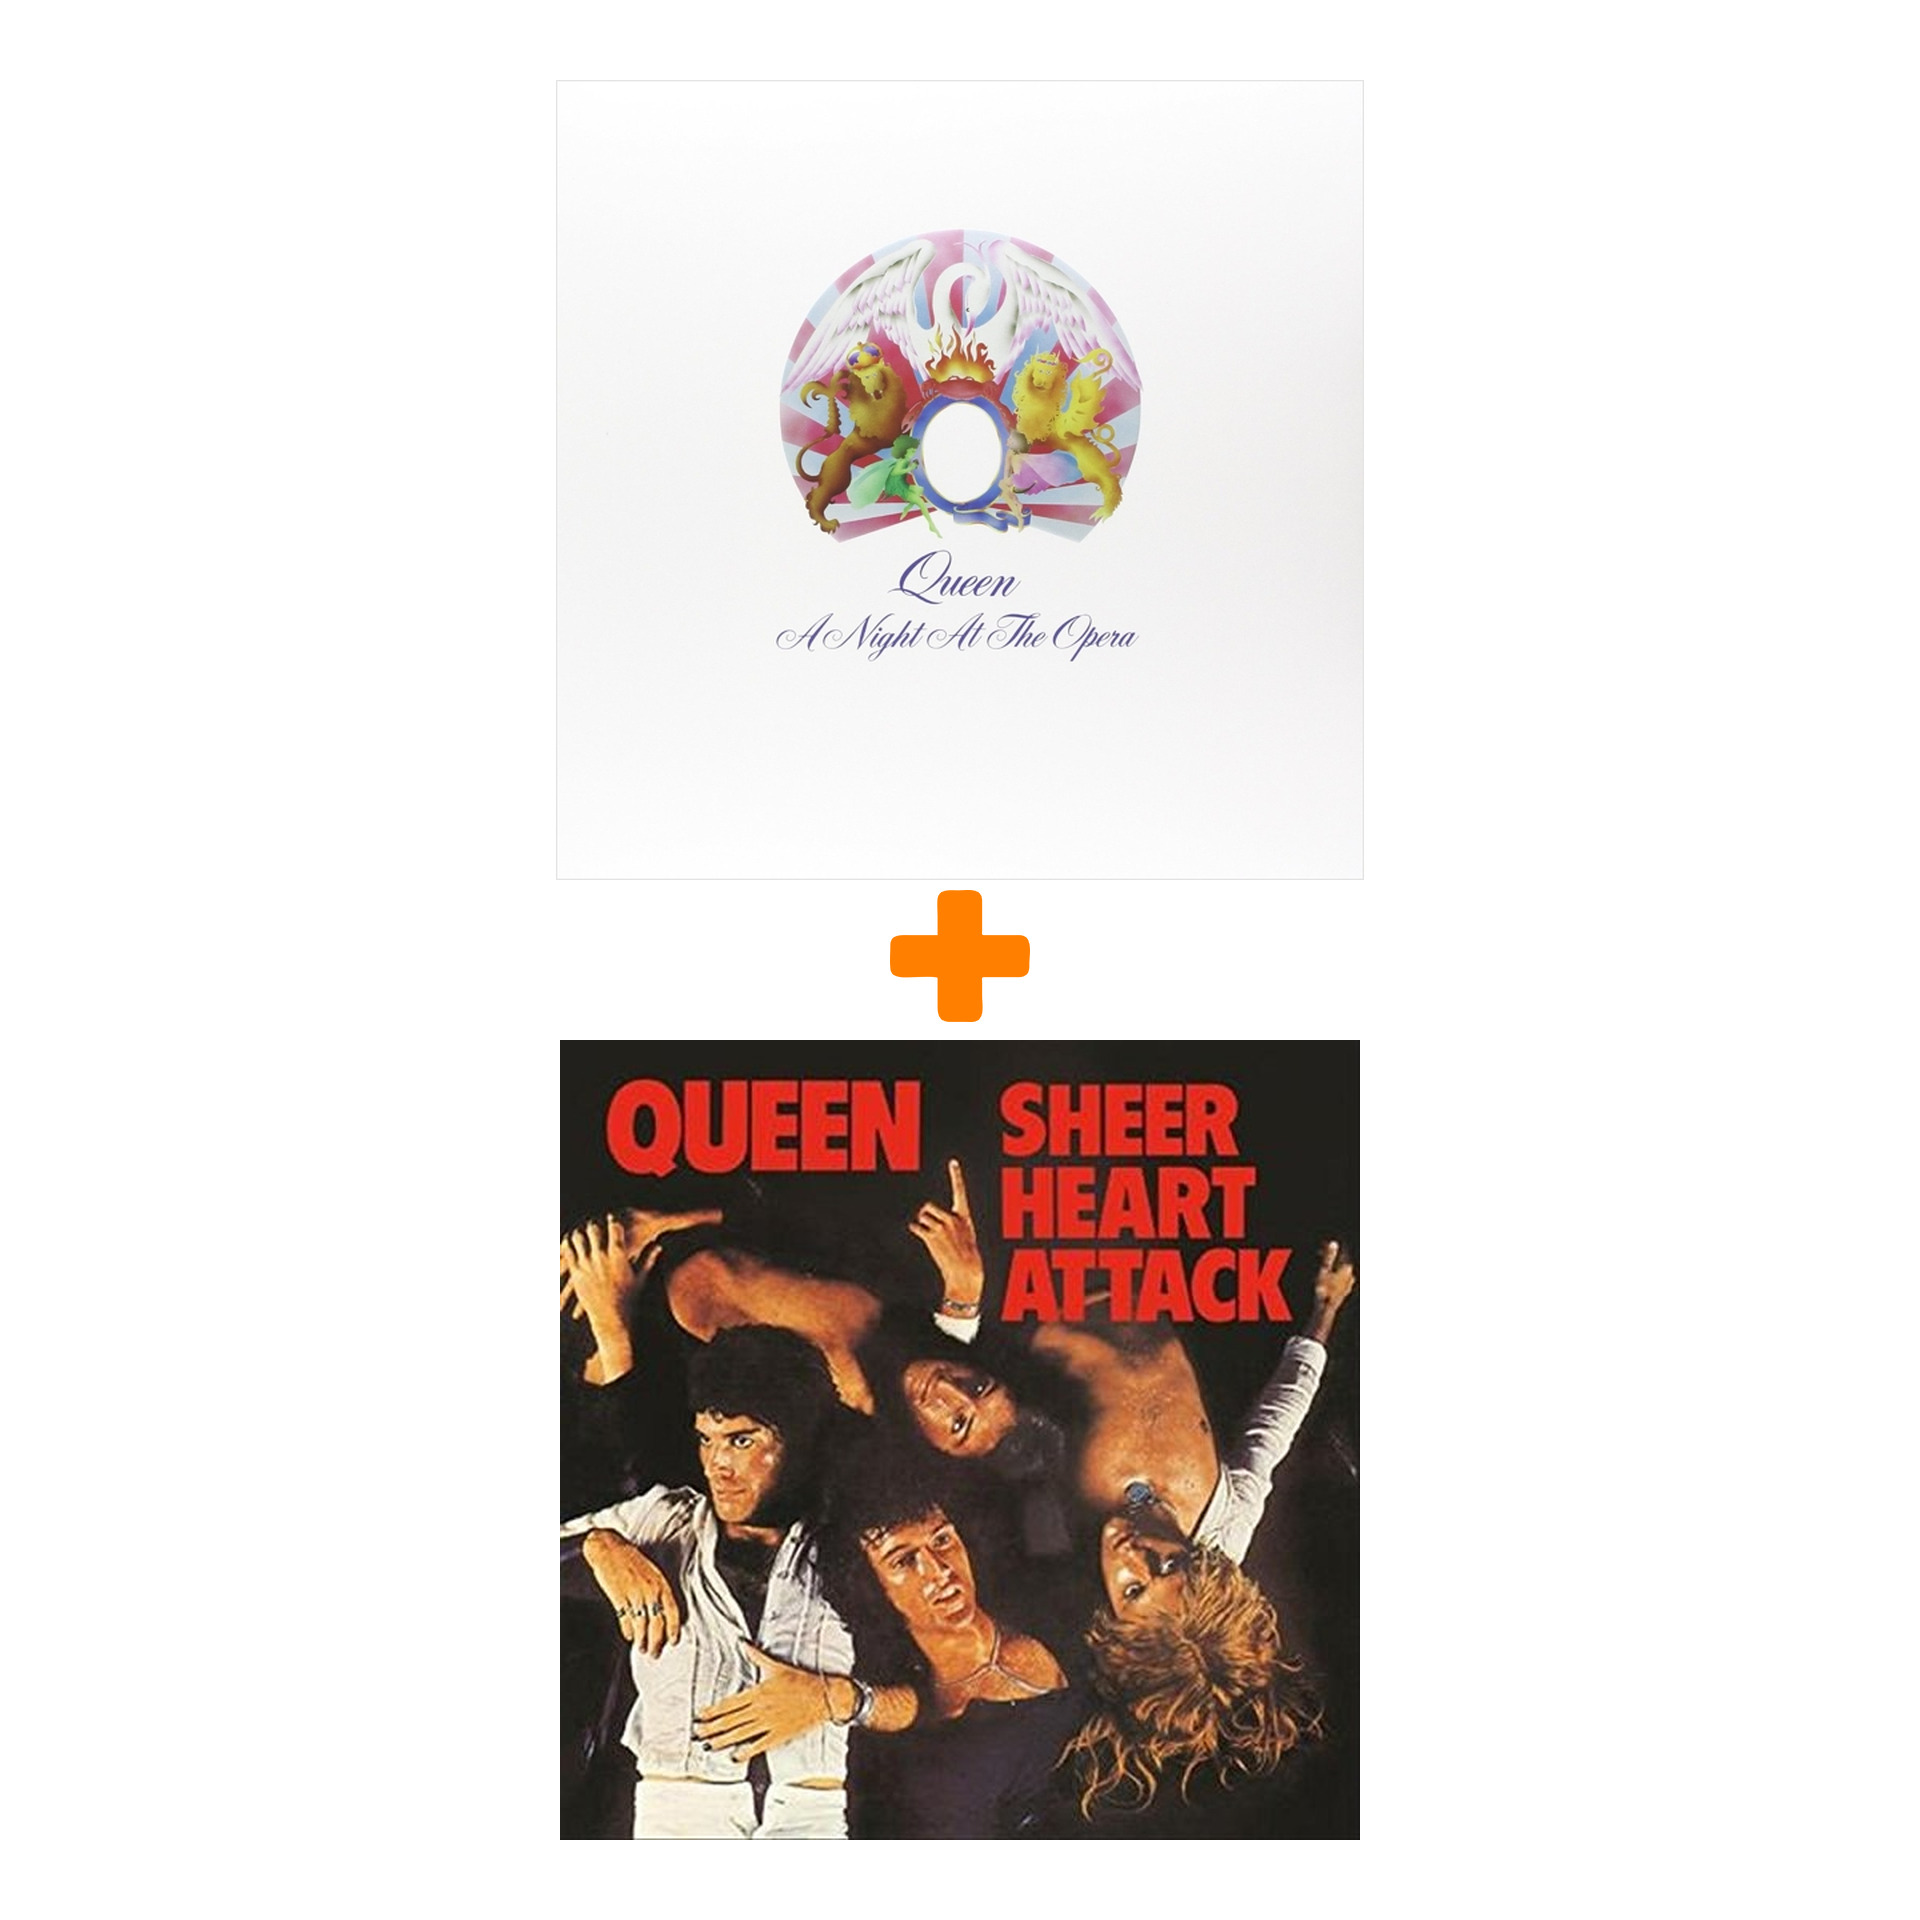 Queen – A Night At The Opera (LP) + Sheer Heart Attack (LP)